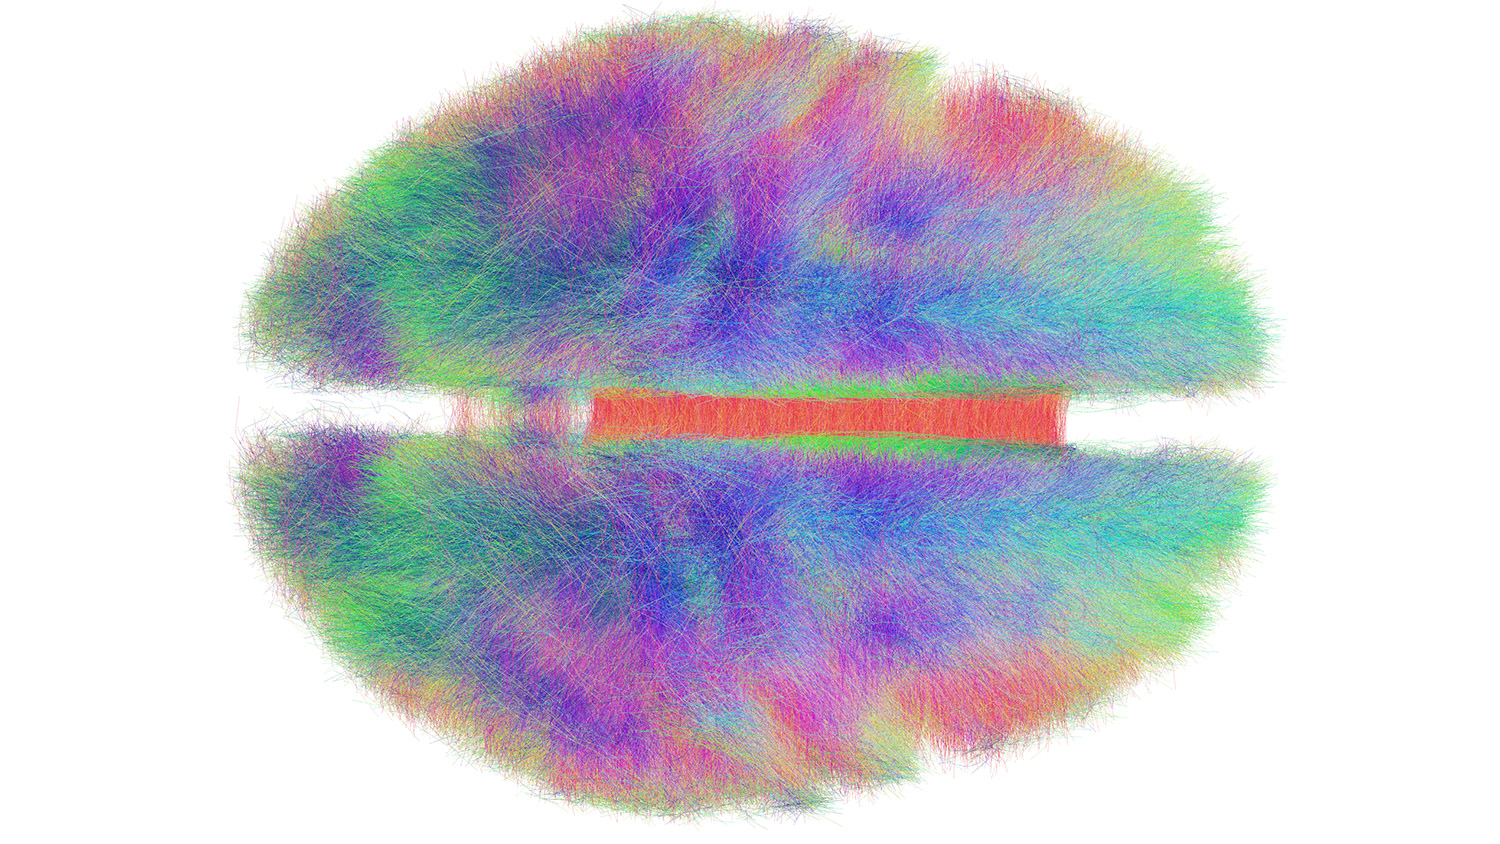 colorful schematic of connections in the brain